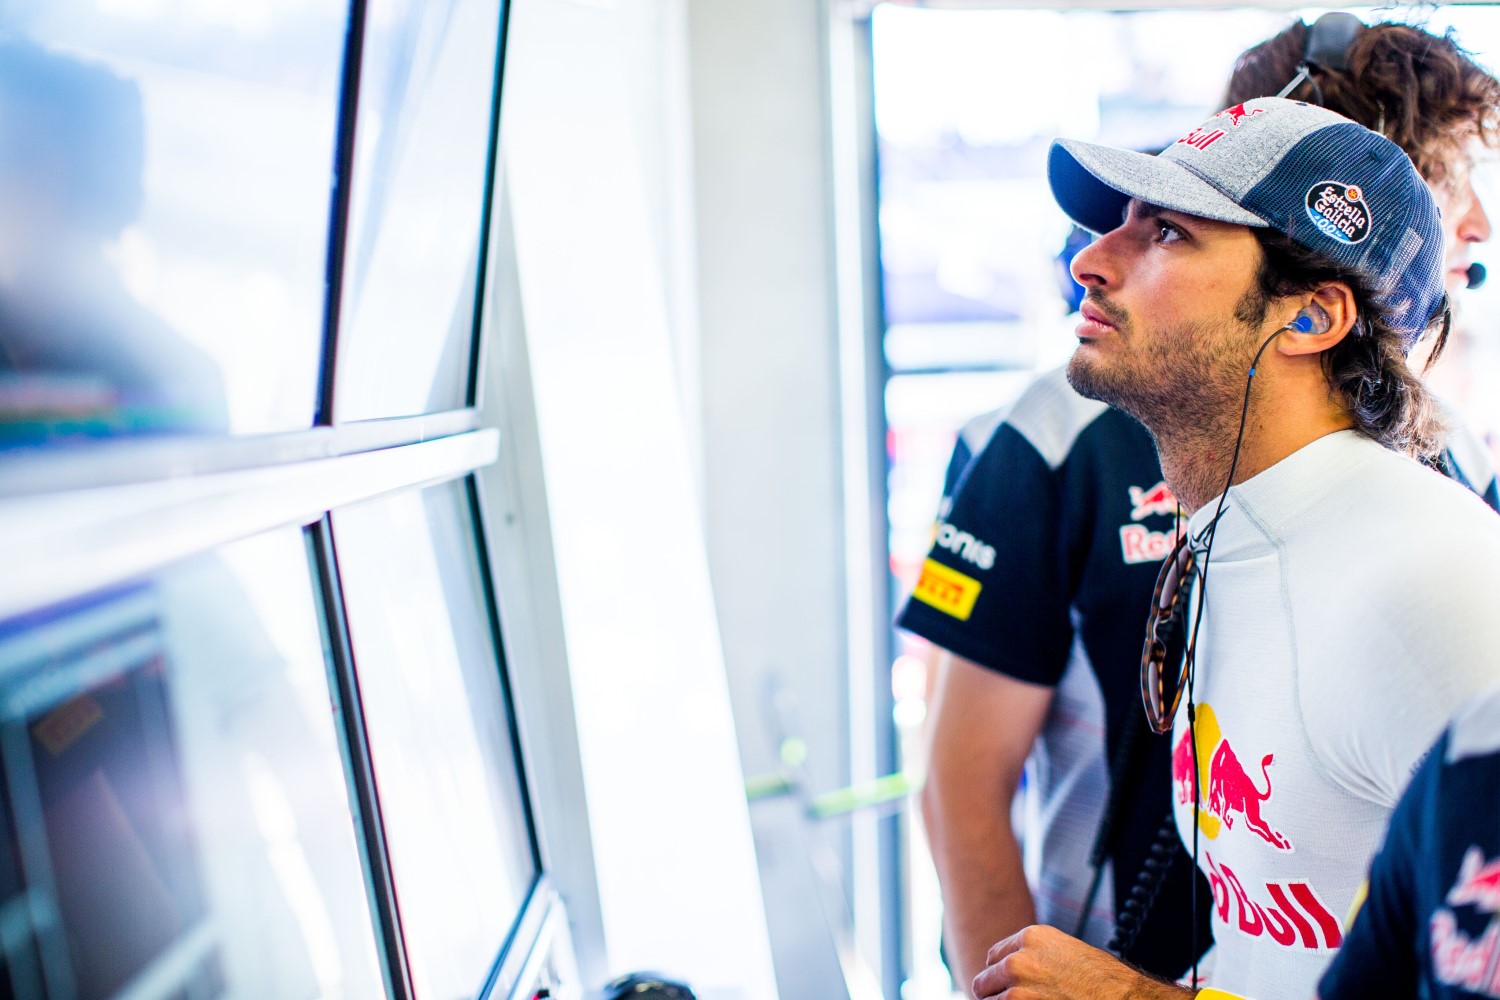 Sainz Jr. stares at the monitors knowing he has zero chance of winning a race with Toro Rosso. With that said Sebastian Vettel won at Monza for Toro Rosso, so it could be done